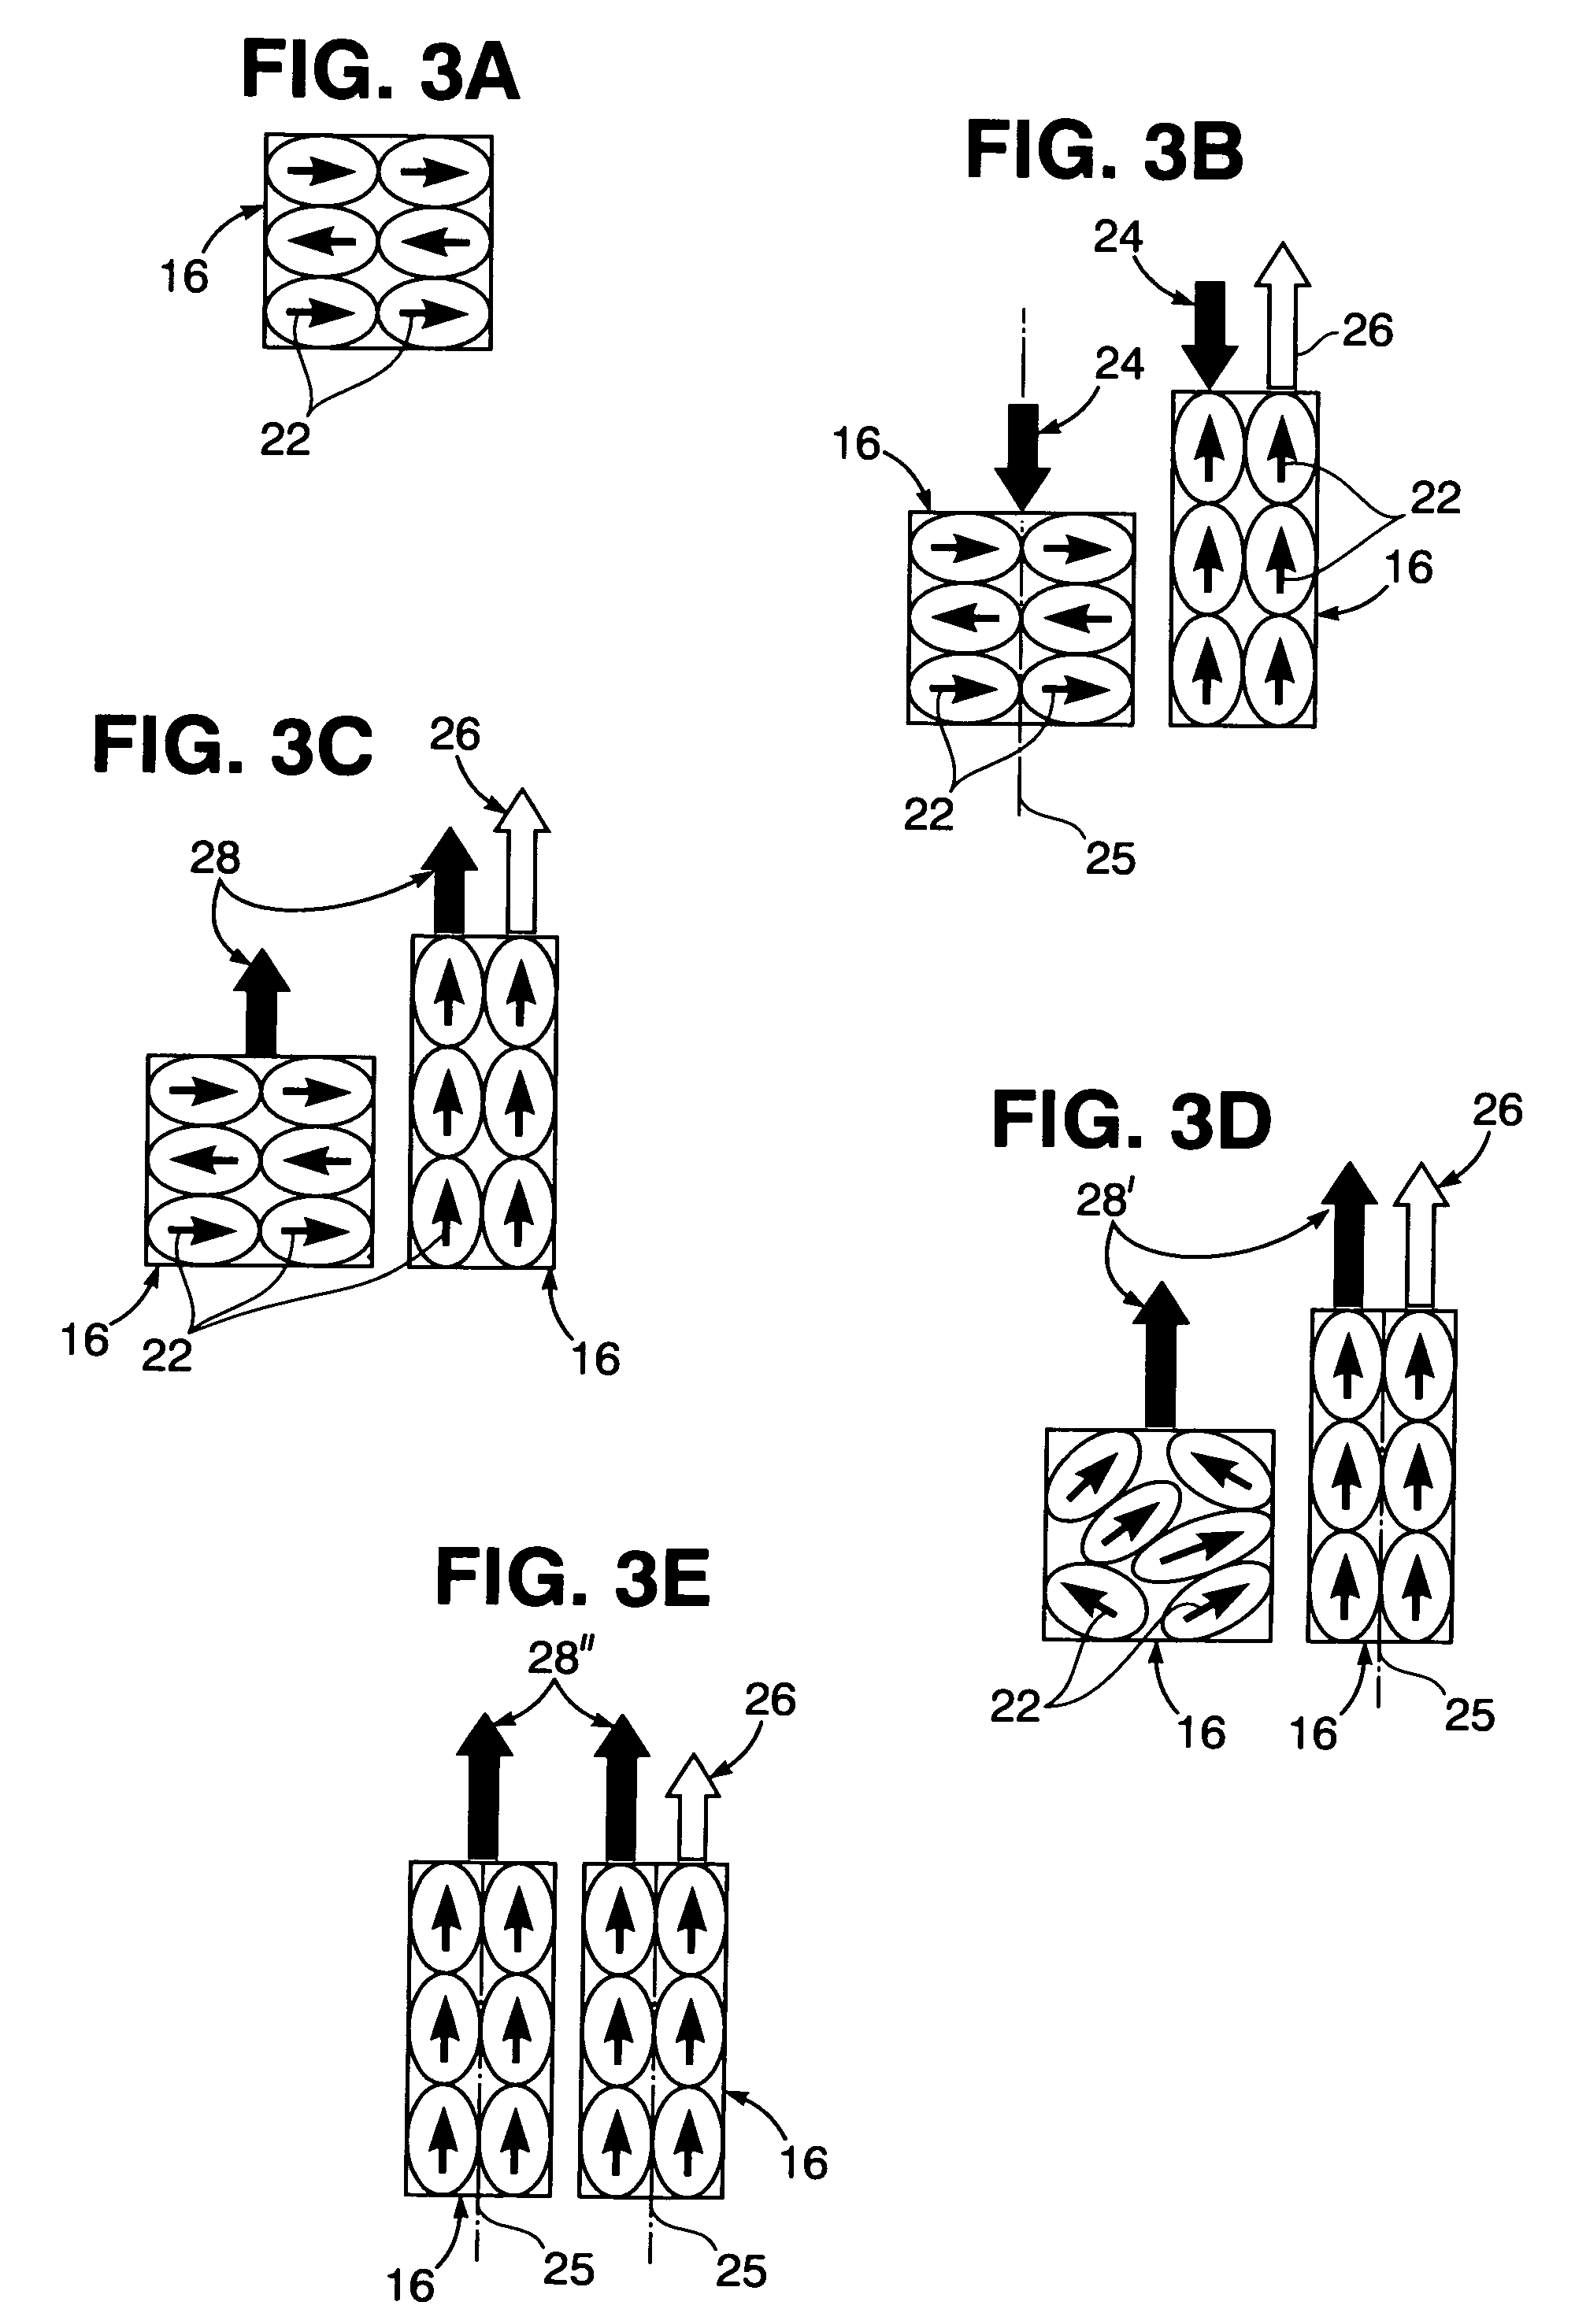 Preparation of positive magnetostrictive materials for use under tension